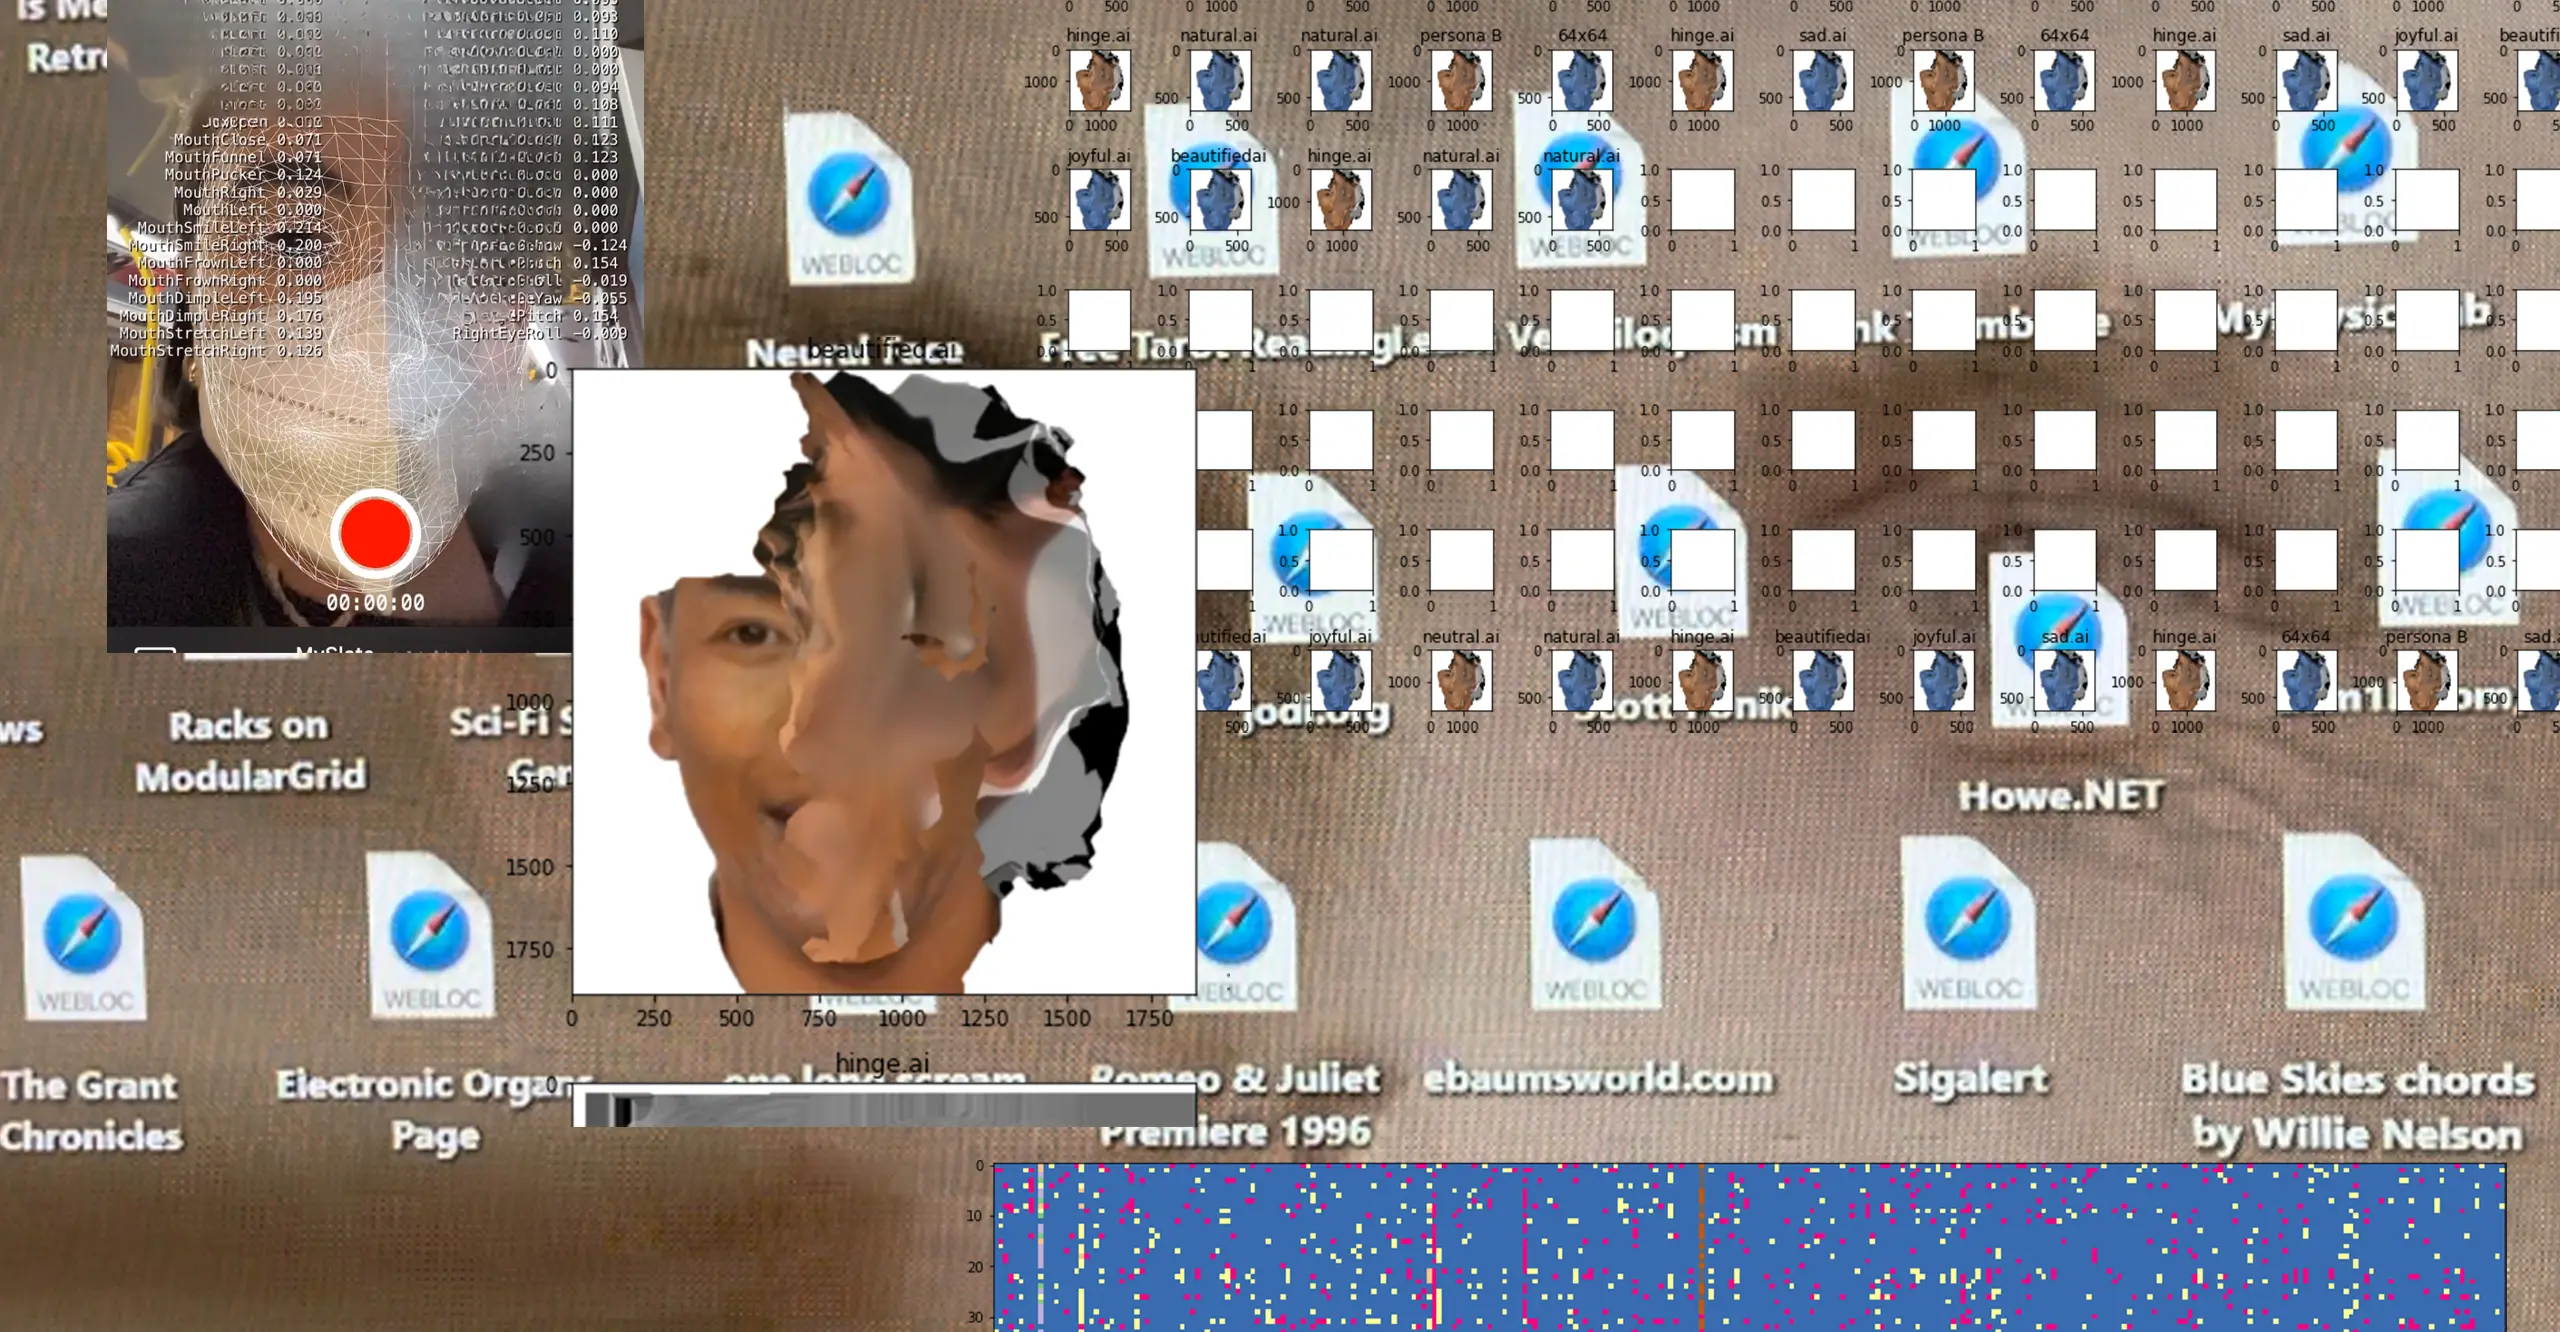 A computer desktop featuring warped photographs of heads, glitches, and many shortcut icons